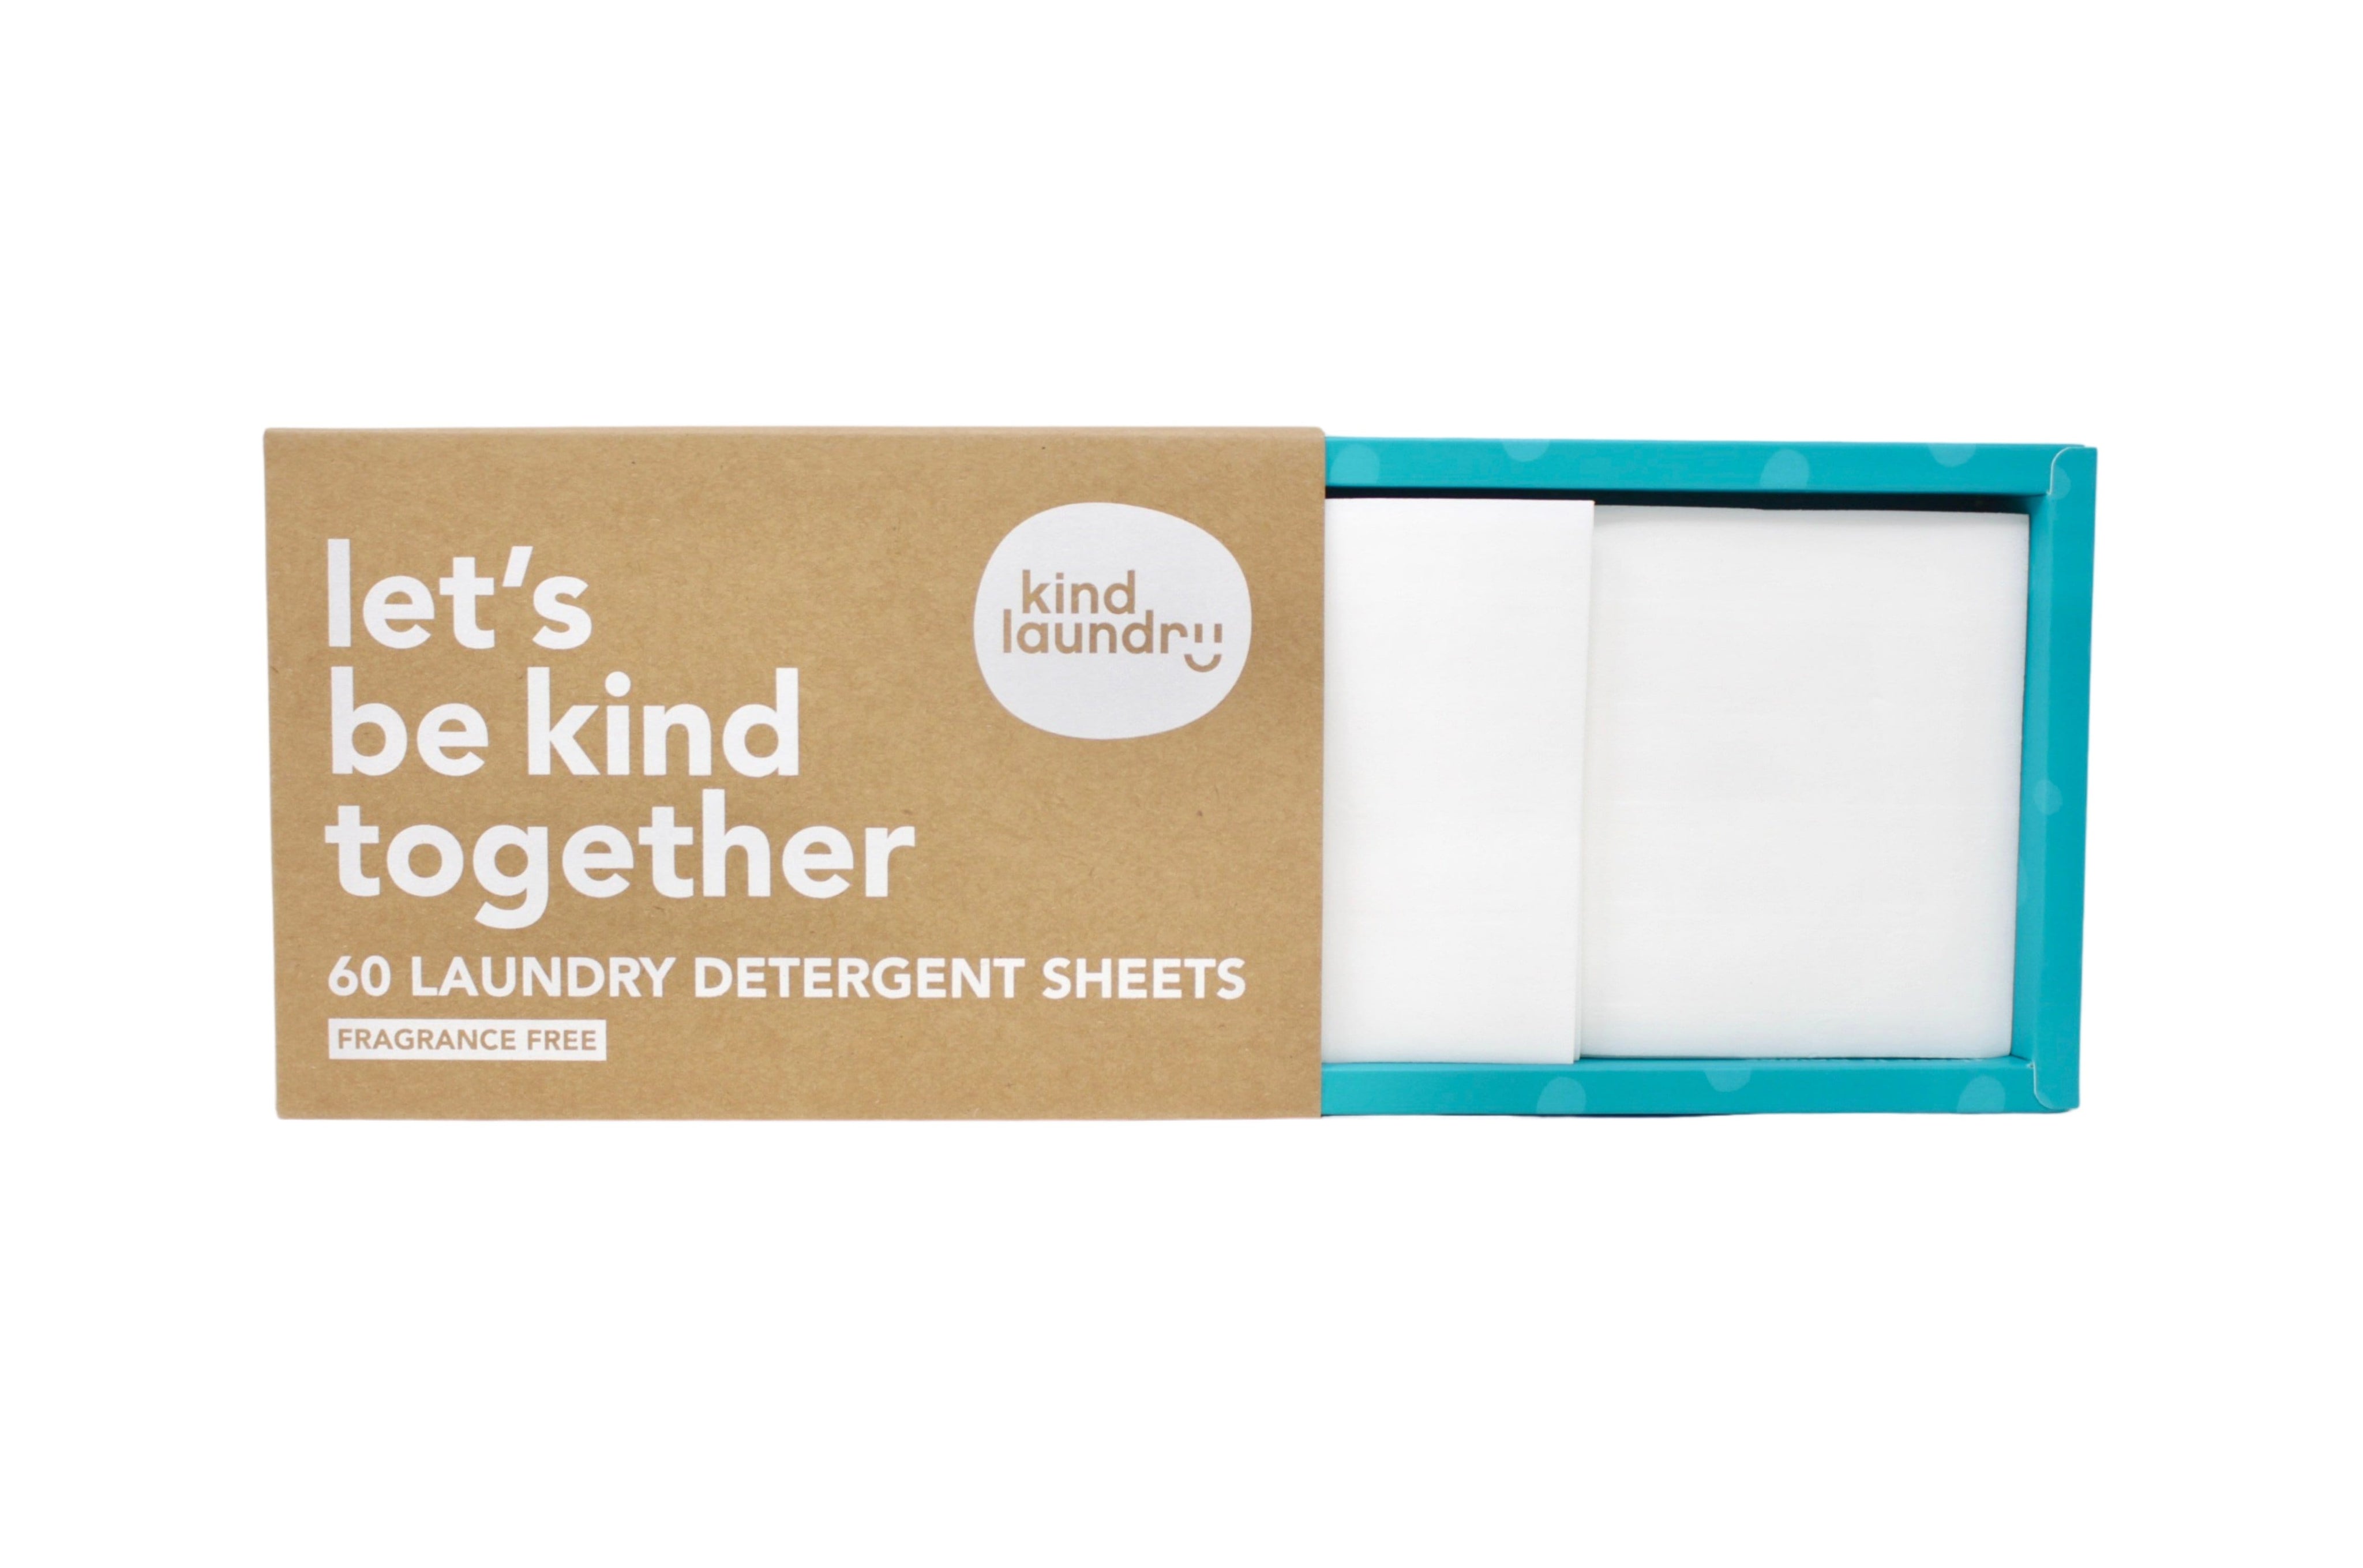 Laundry Detergent Sheets - The Waste Less Shop